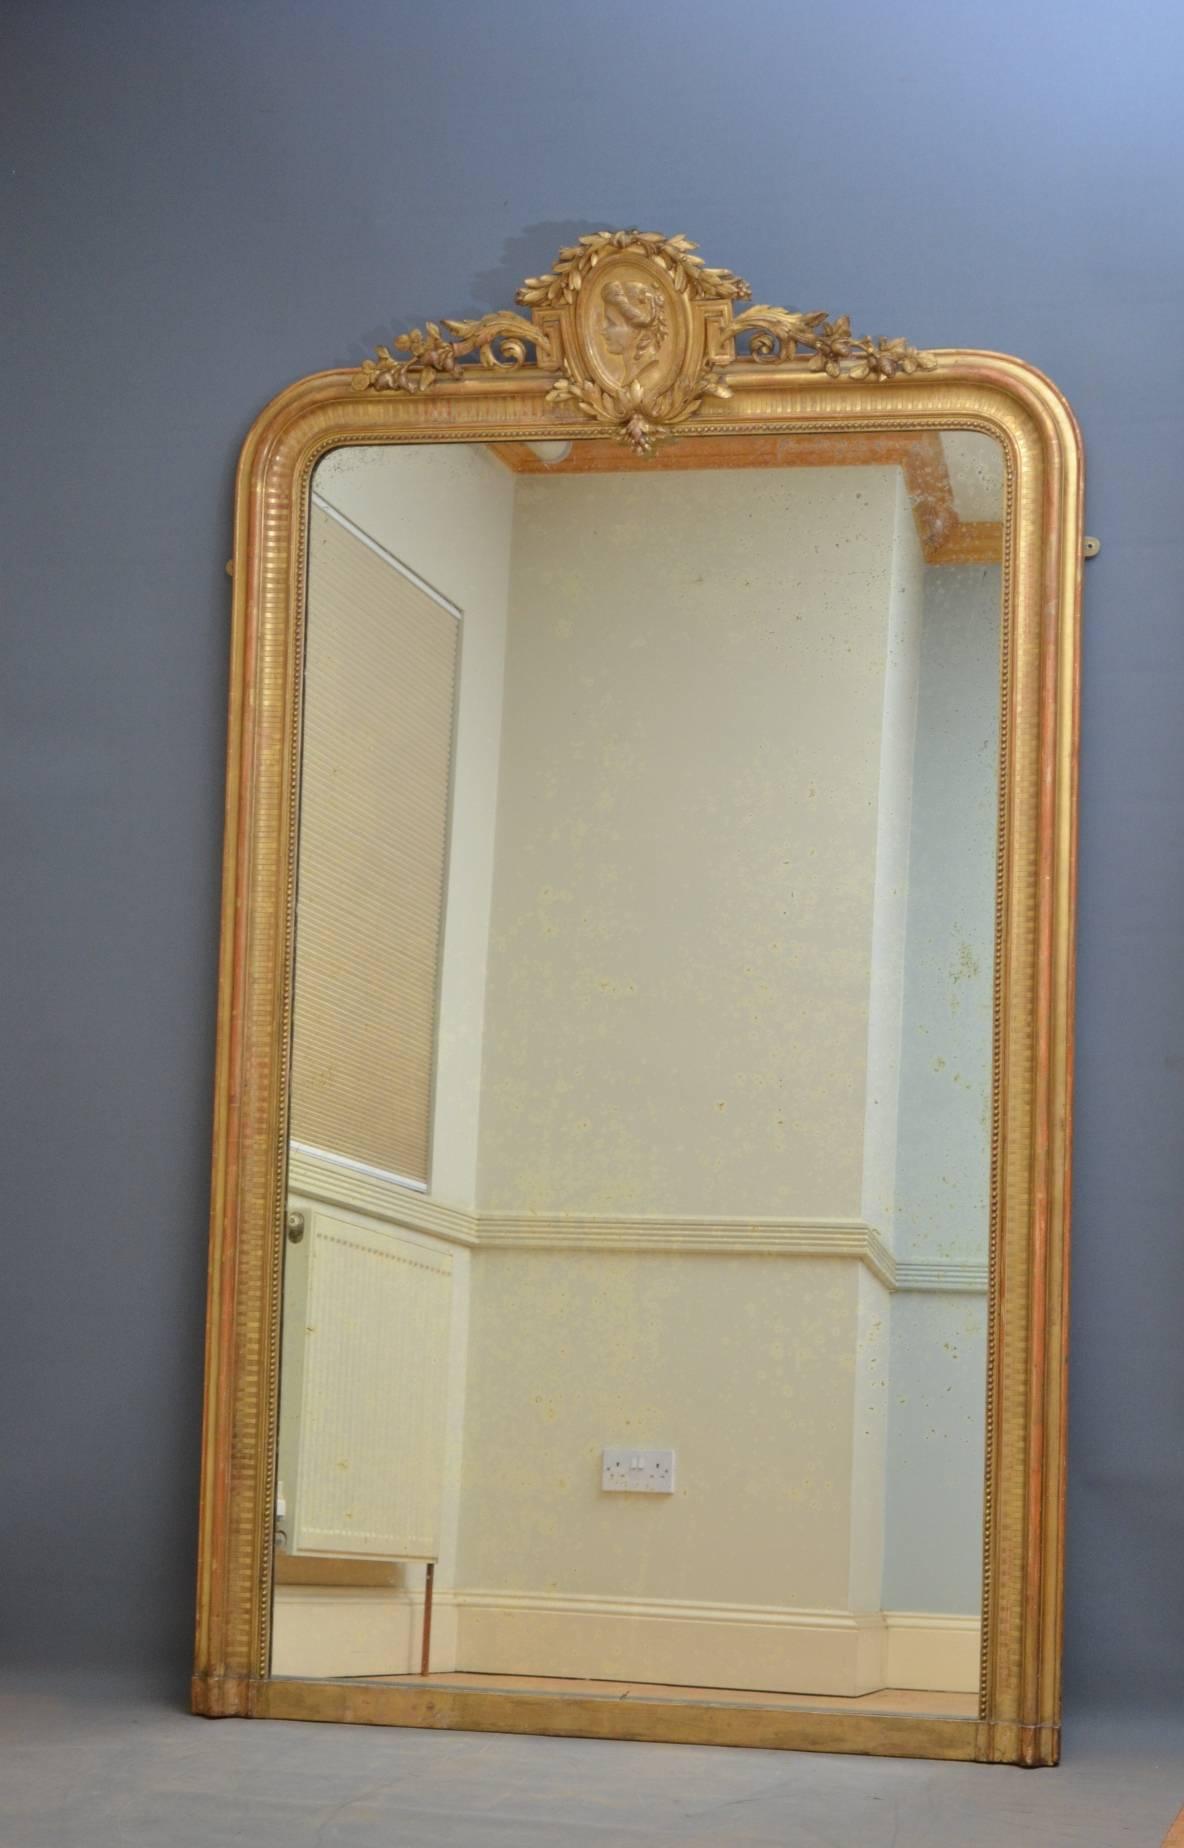 K0248 large French gilt mirror, having fine cartouche with floral motifs to centre and original mirror plate in beaded and moulded frame. This mirror retains its original gilt and mirror plate with fantastic foxing throughout. The mirror can floor